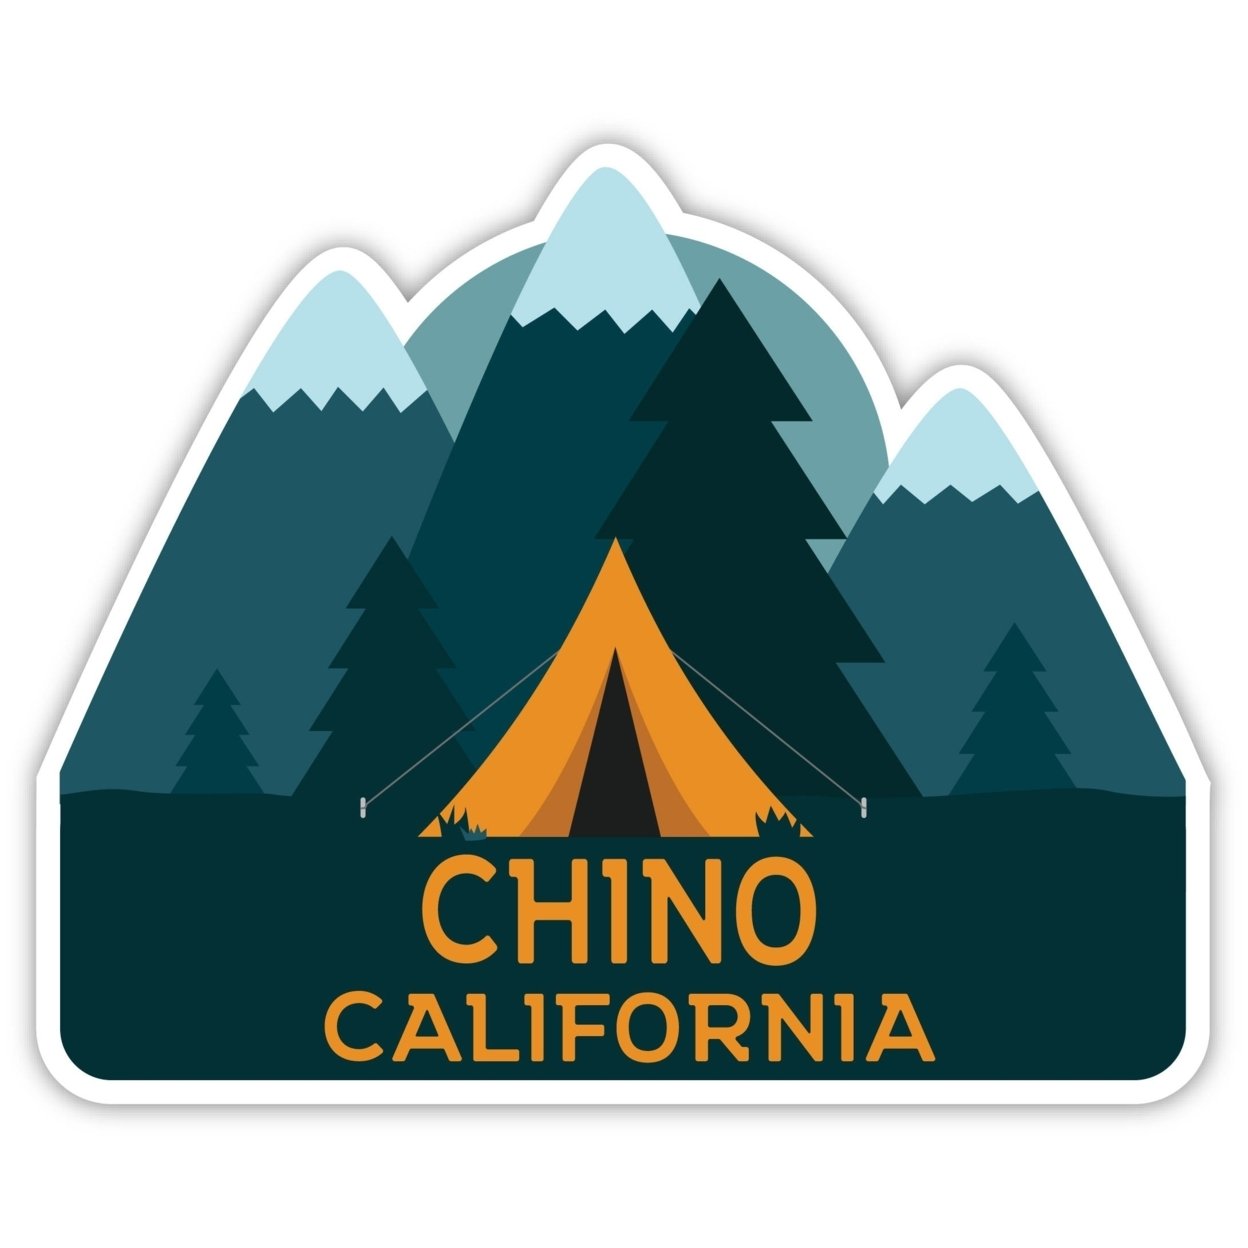 Chino California Souvenir Decorative Stickers (Choose Theme And Size) - 4-Pack, 4-Inch, Tent